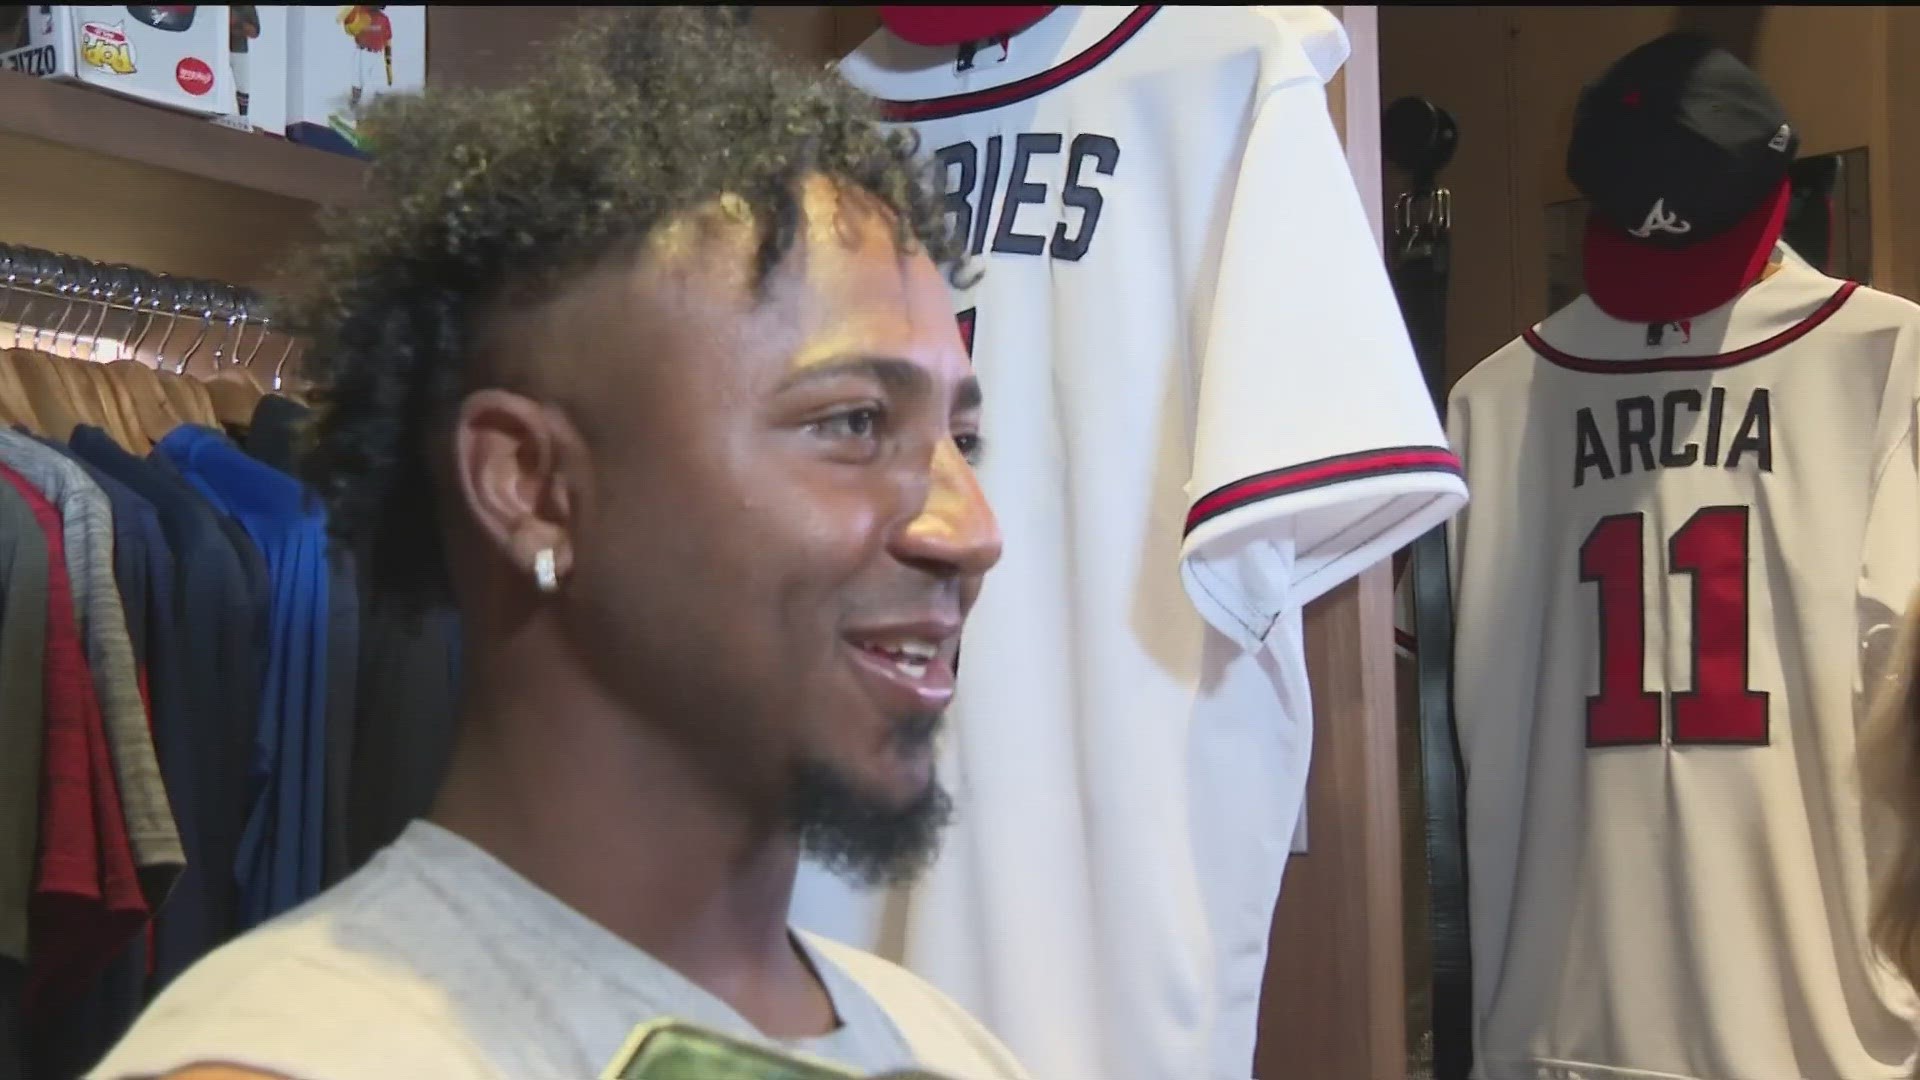 The Atlanta Braves officially reveal their new jerseys and they're nice